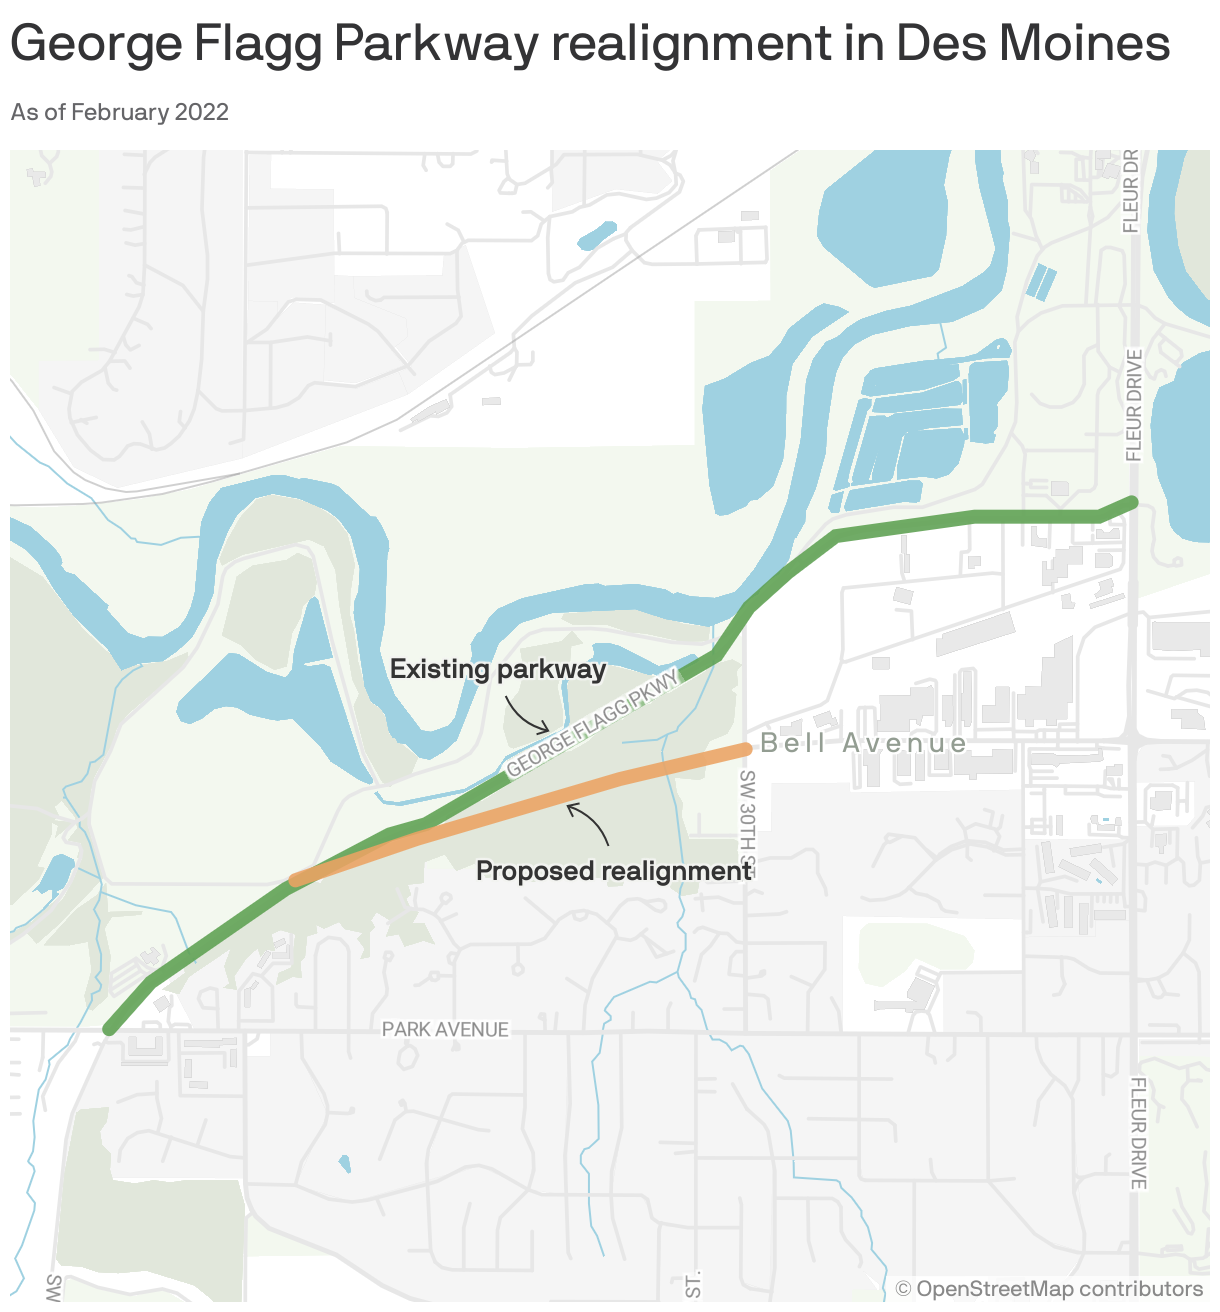 George Flagg Parkway realignment in Des Moines